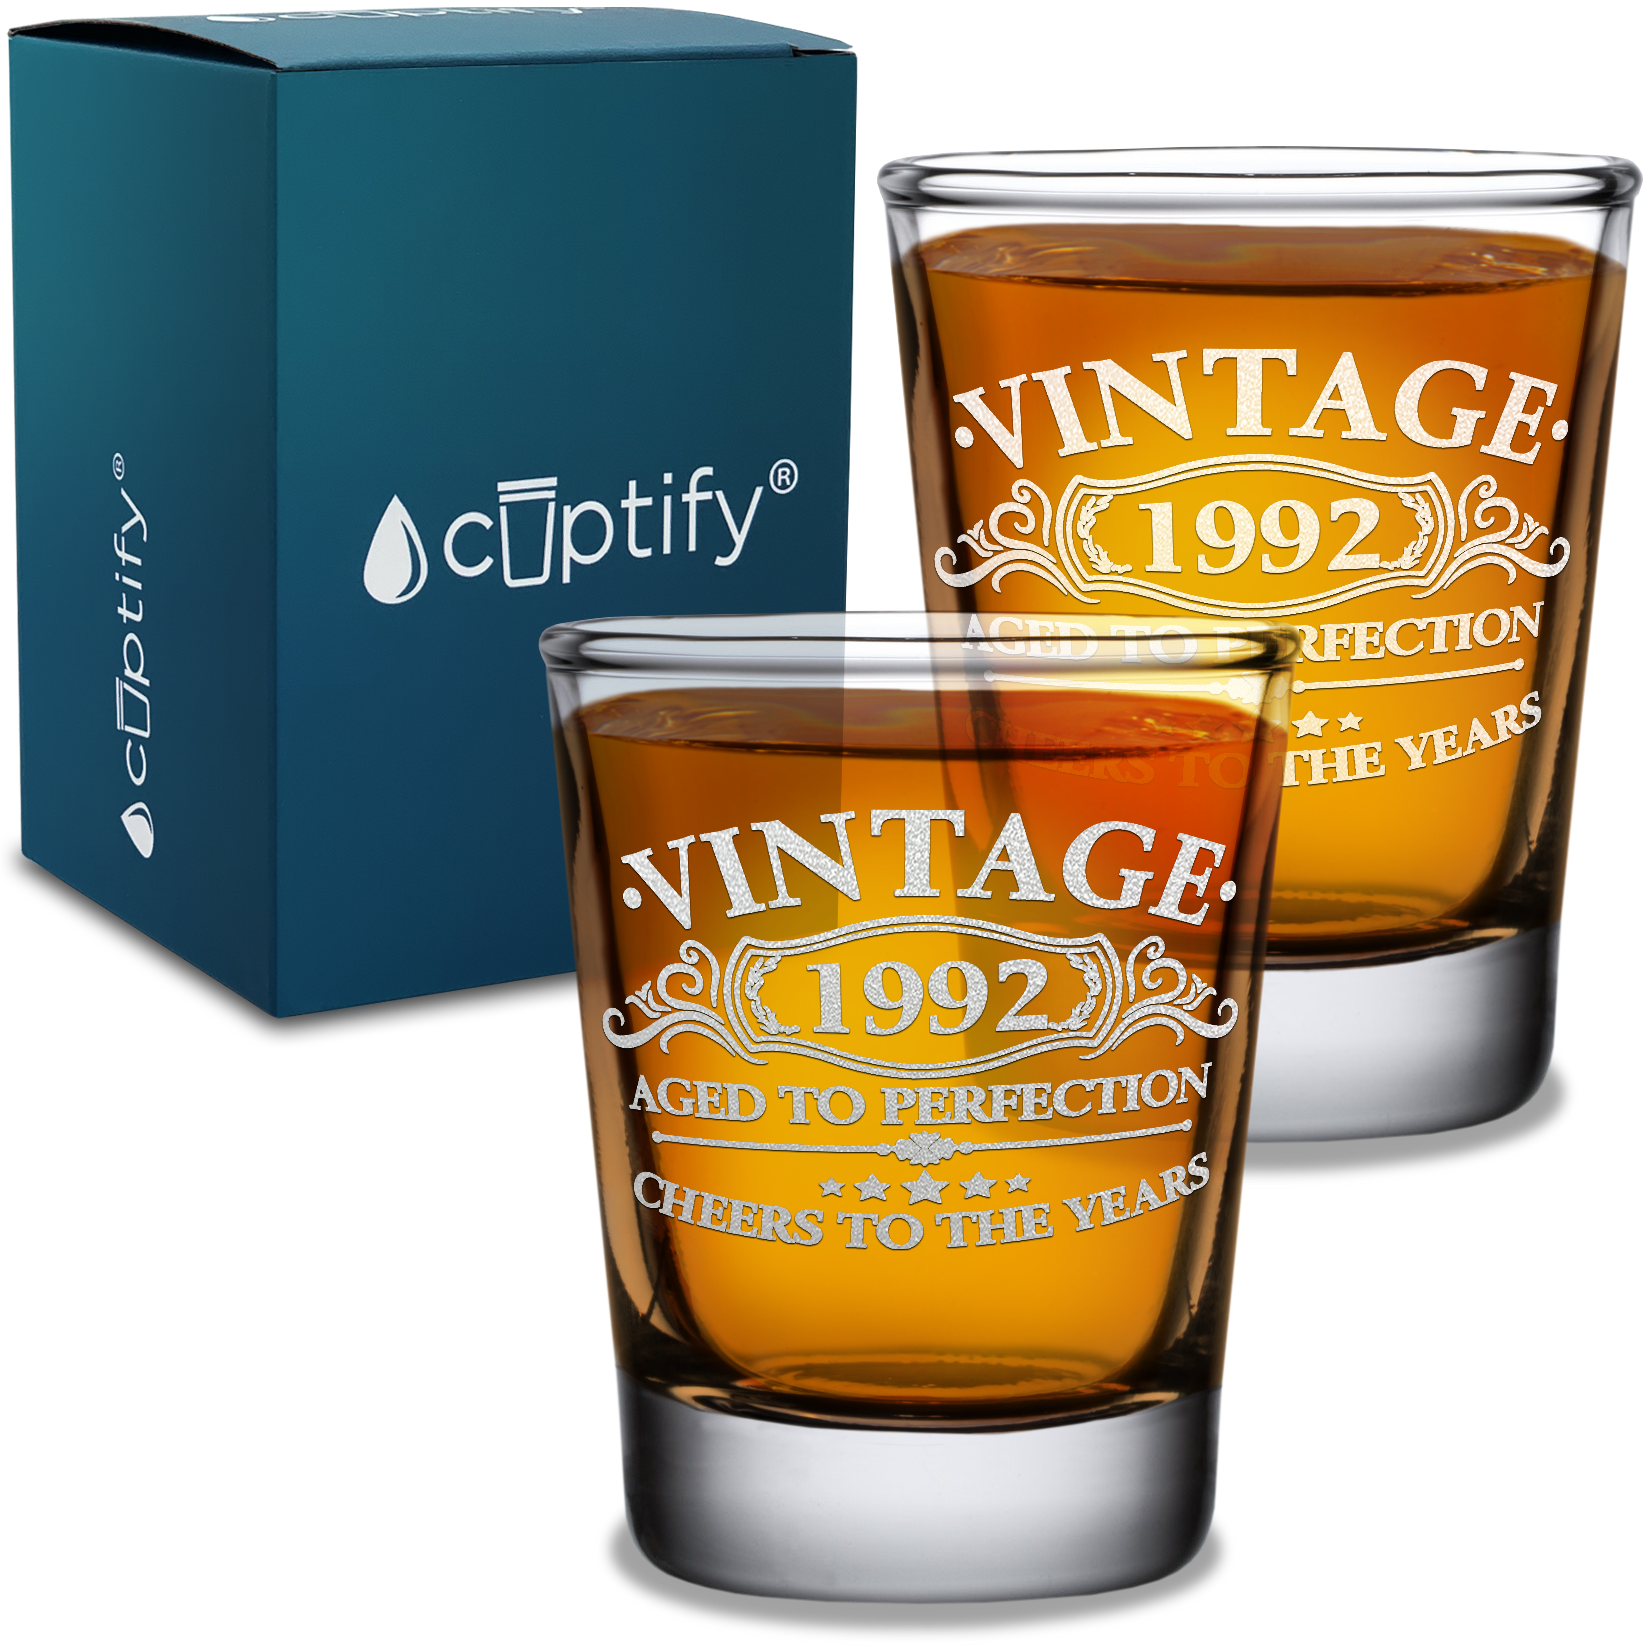 Vintage Aged To Perfection Cheers To 29 Years 1992 Laser Engraved on 2oz Shot Glasses - Set of 2